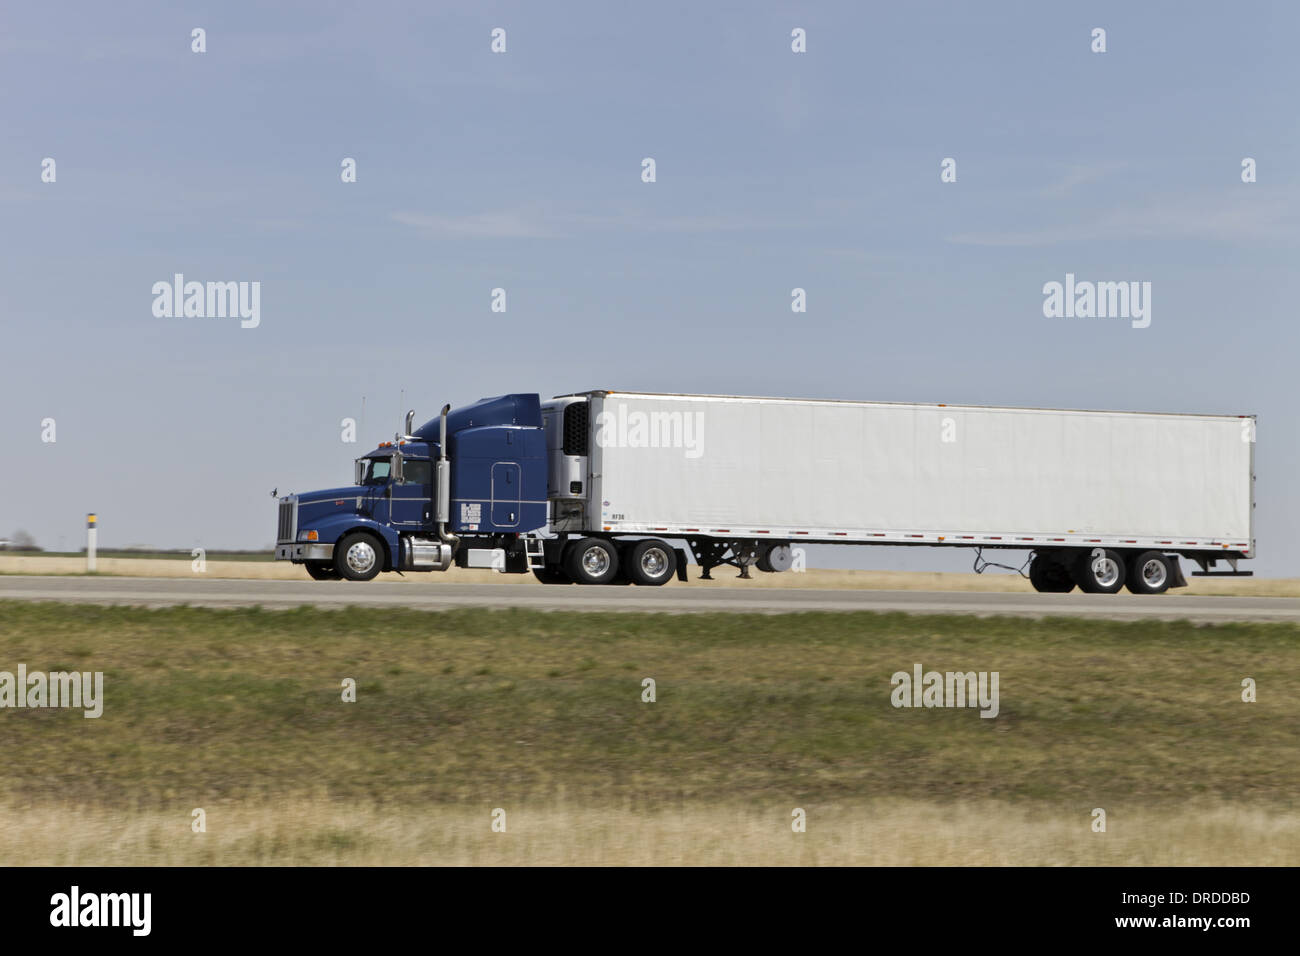 Blue Semi truck on the Highway heading right to left with motion blur of background, white box van twin axle trailer Stock Photo